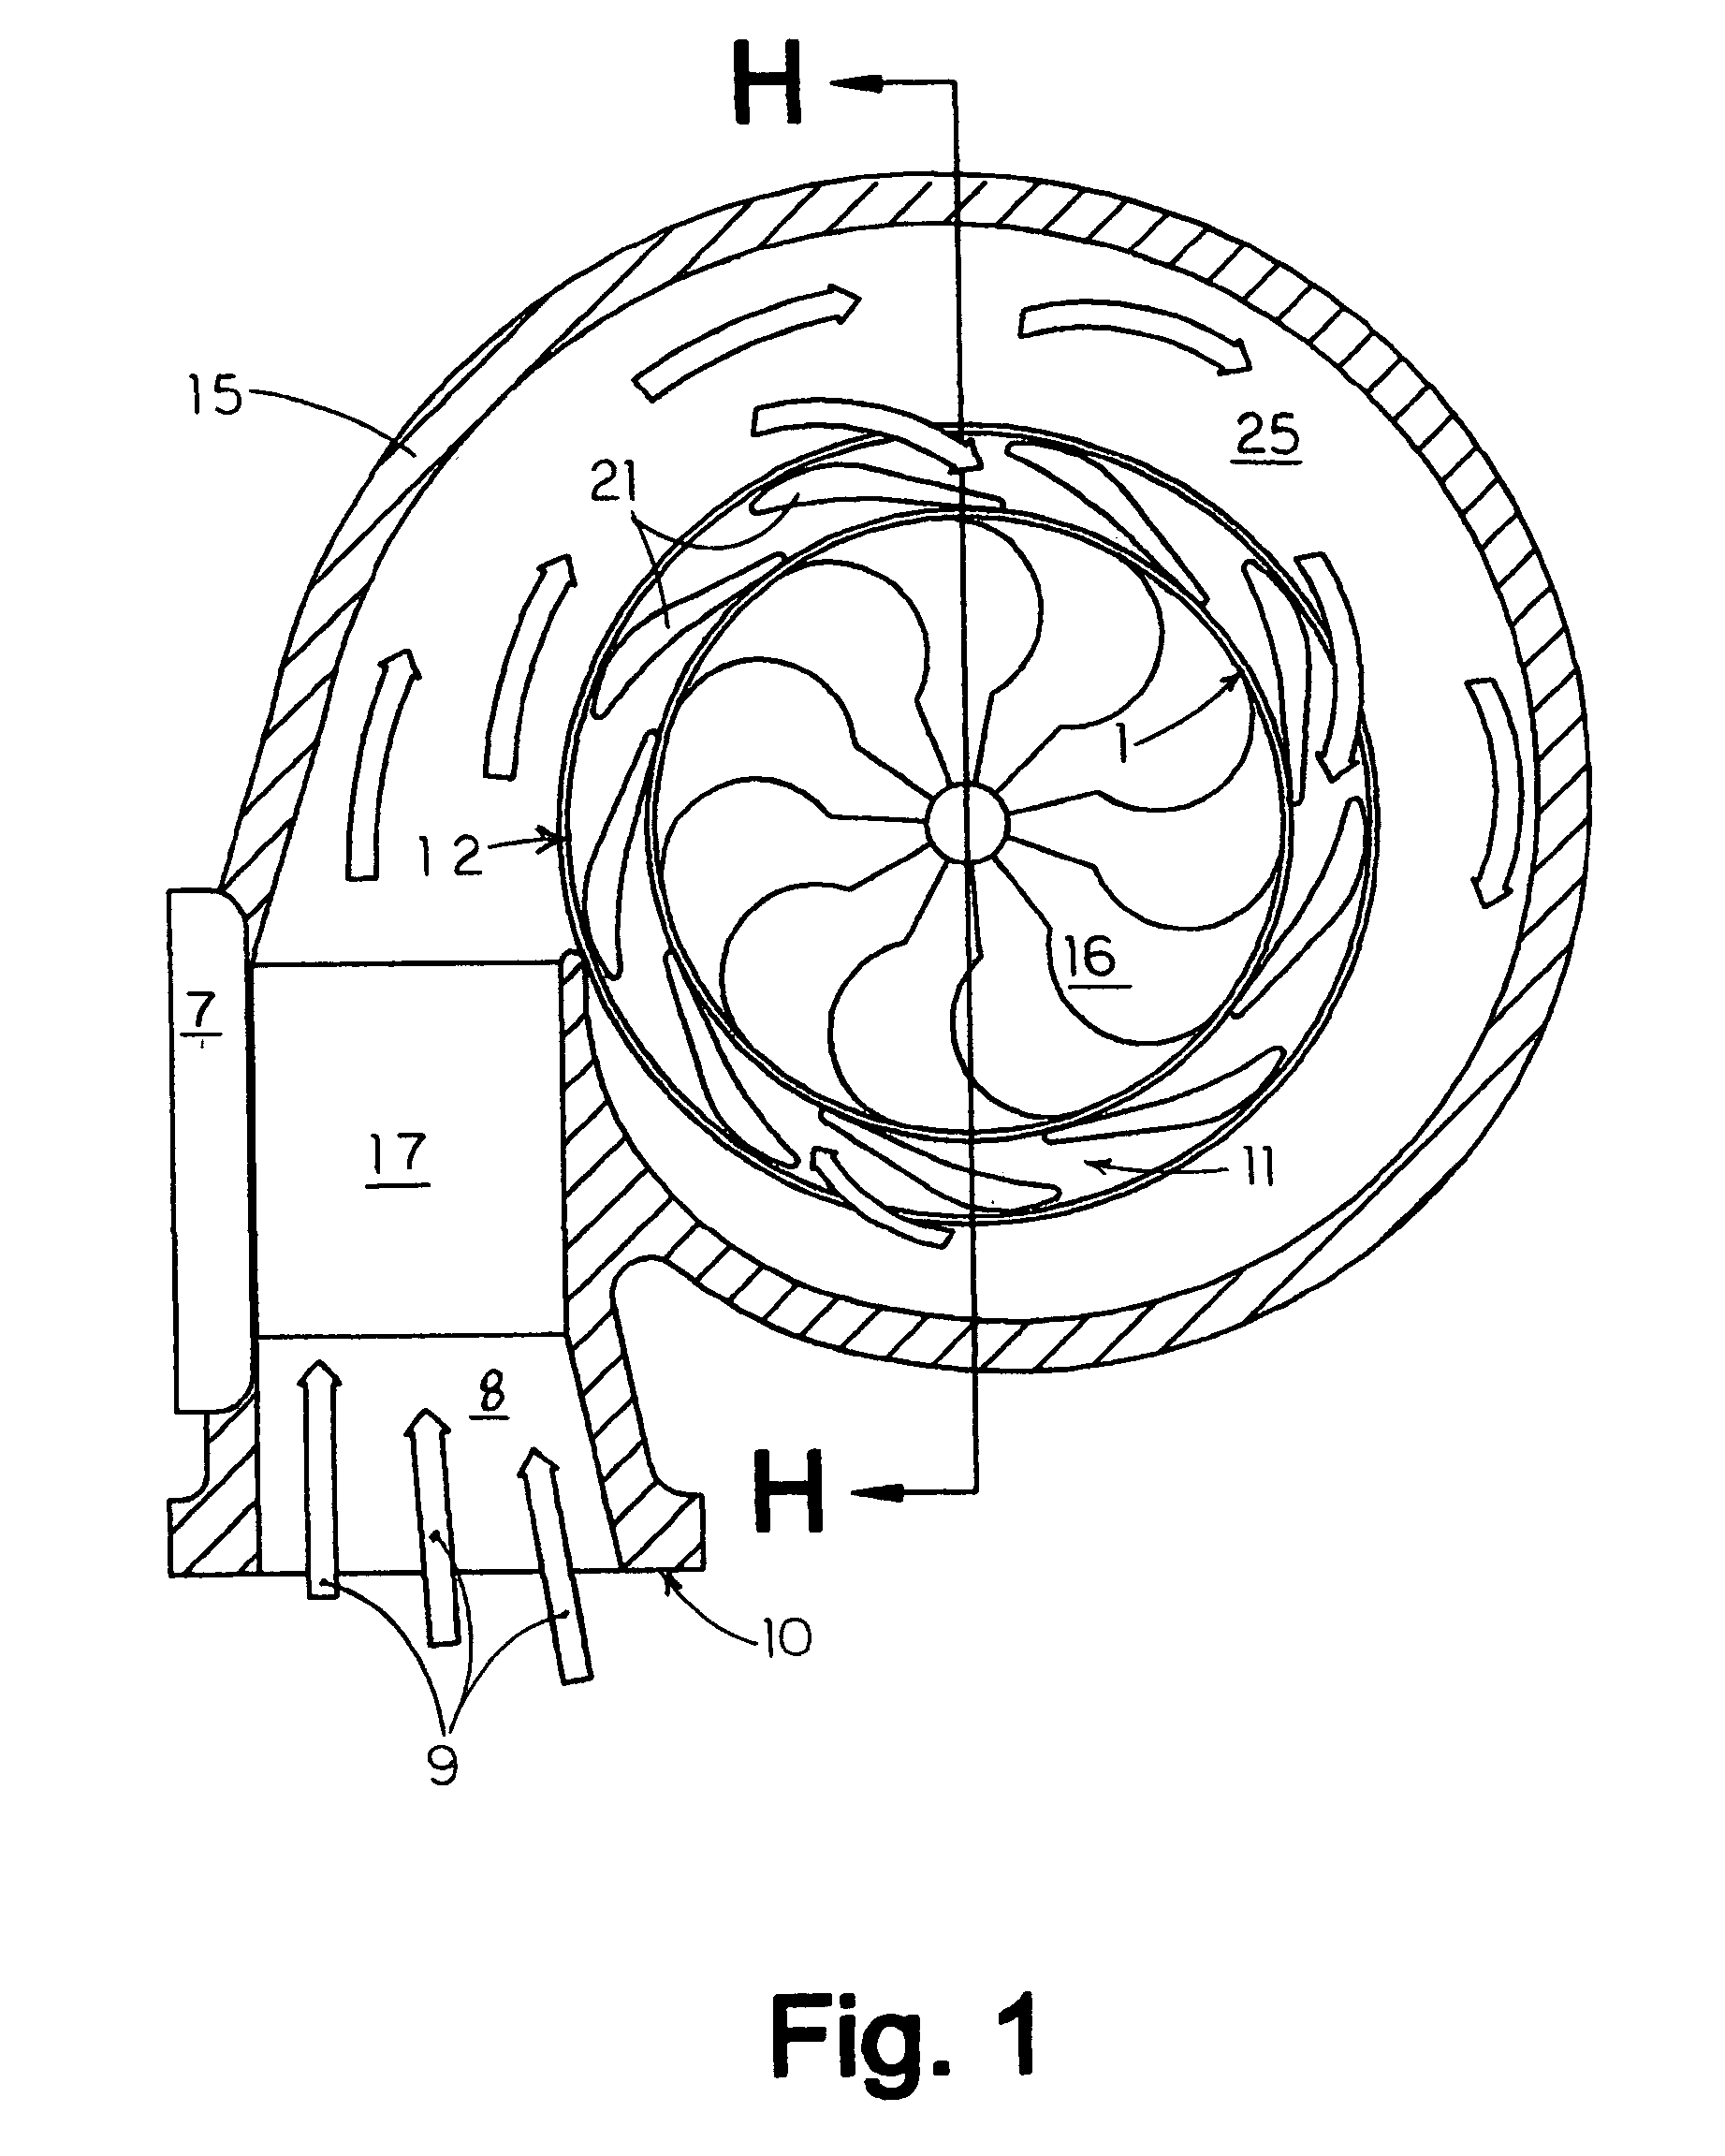 Turbine assemblies and related systems for use with turbochargers